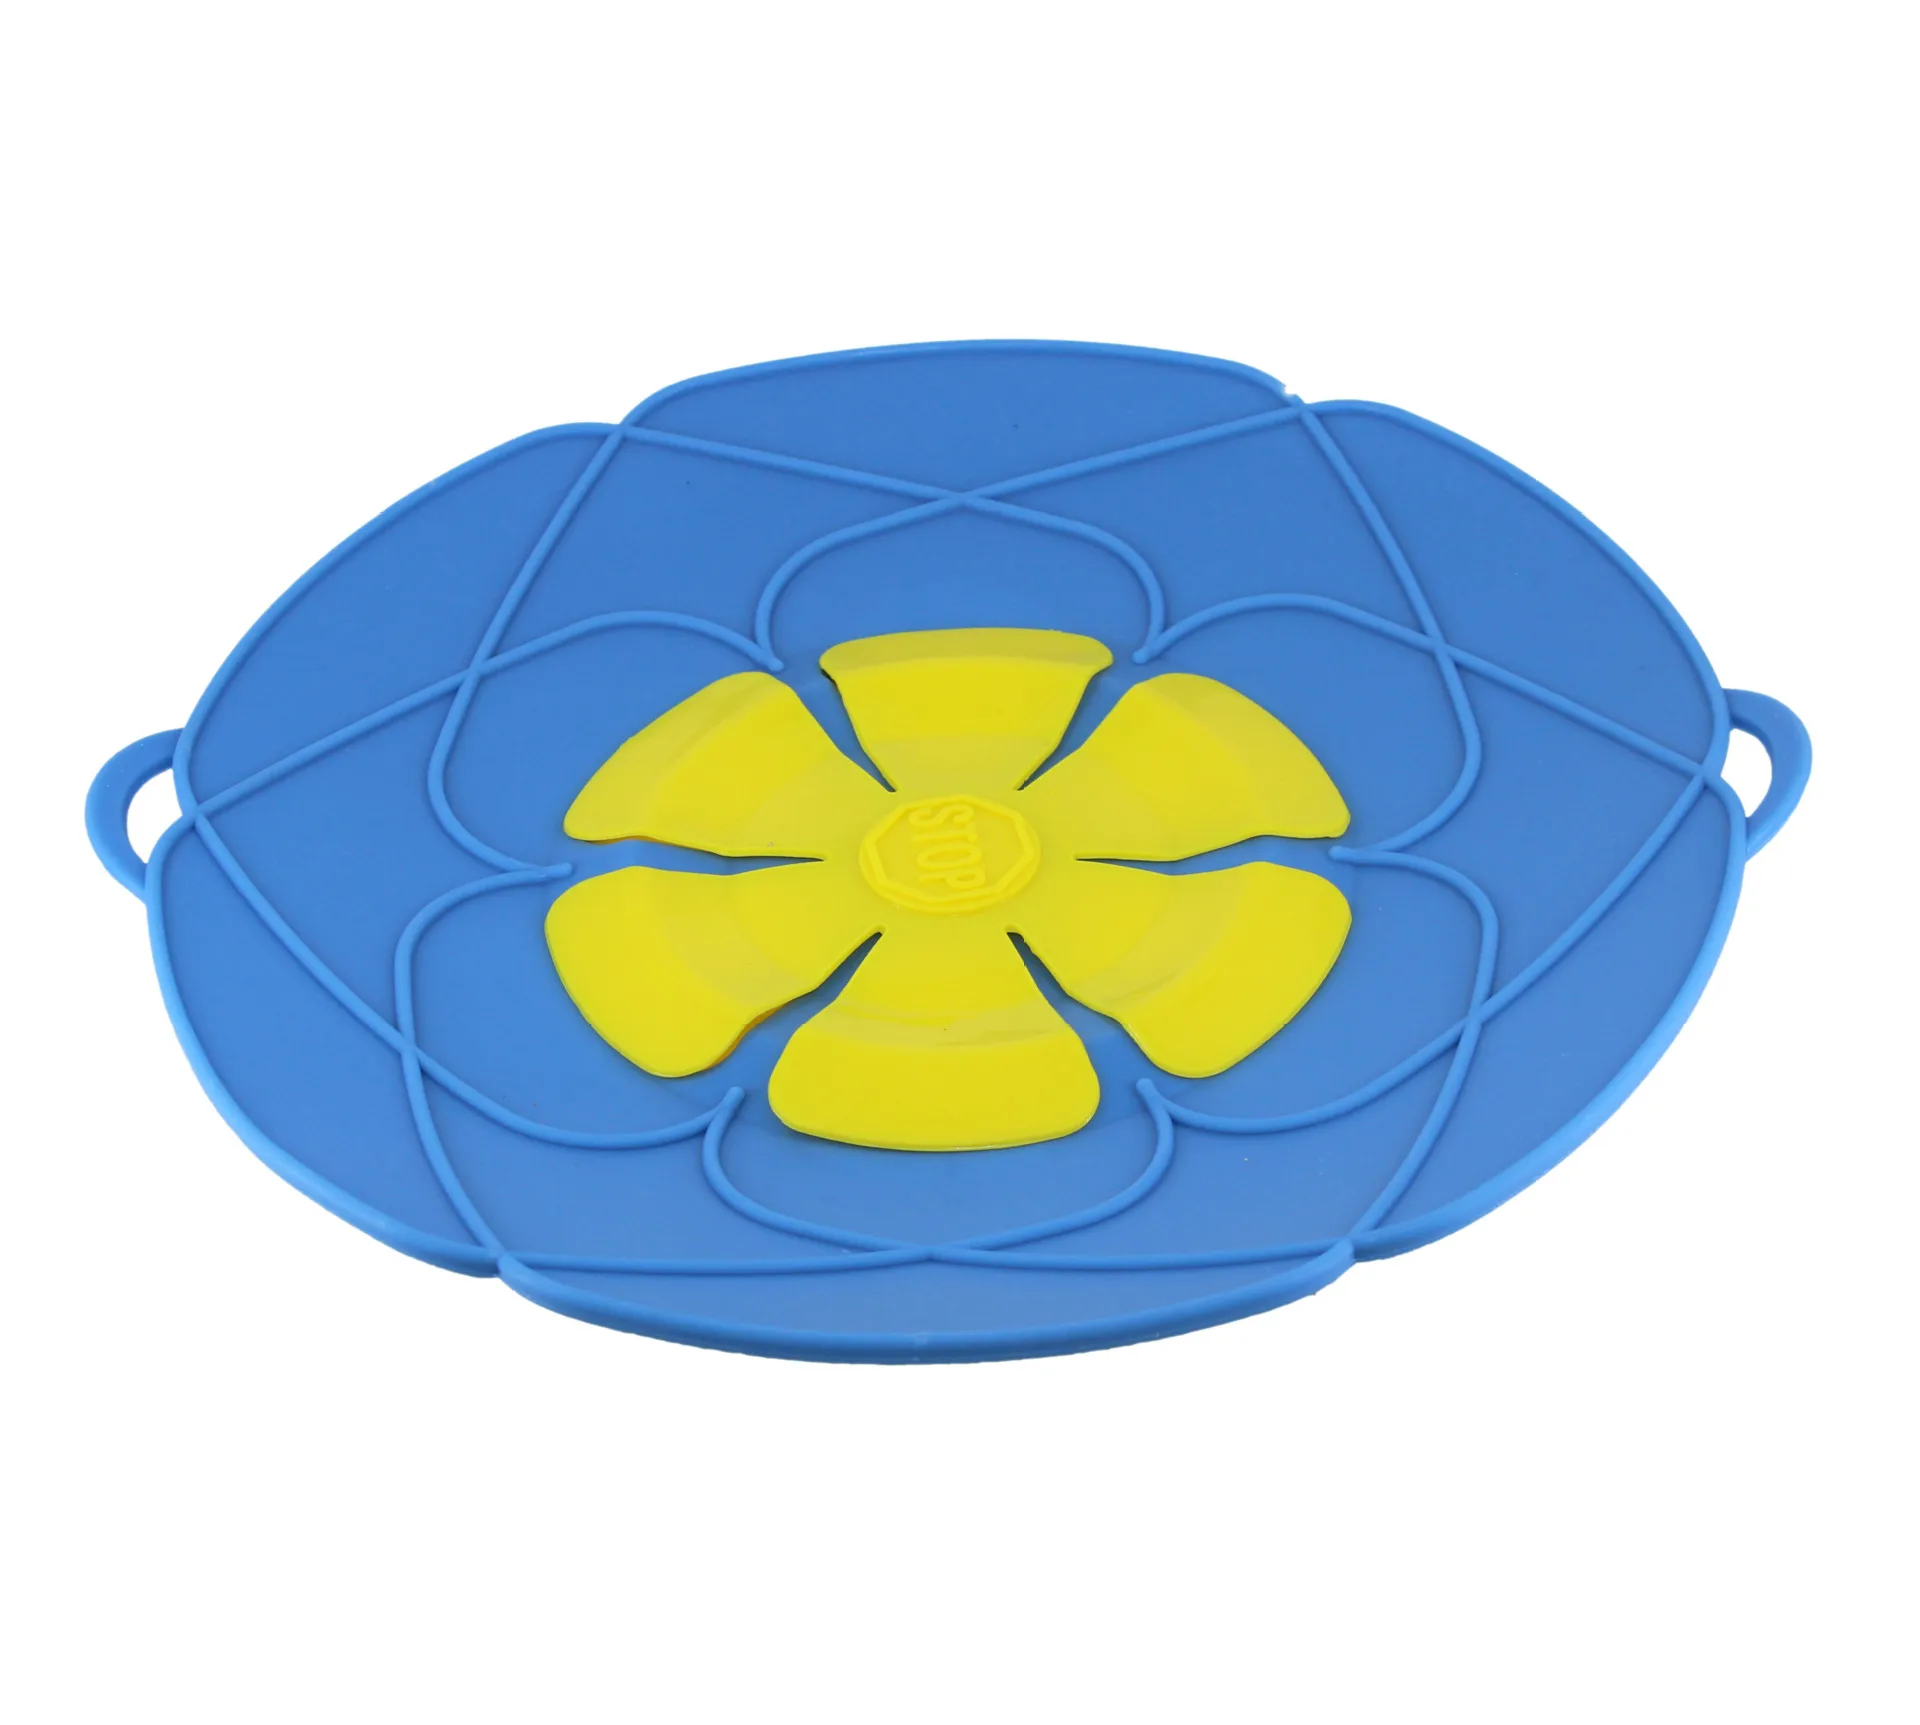 Silicone Lid Spill Stopper Cover for Pot Pan Kitchen Accessories